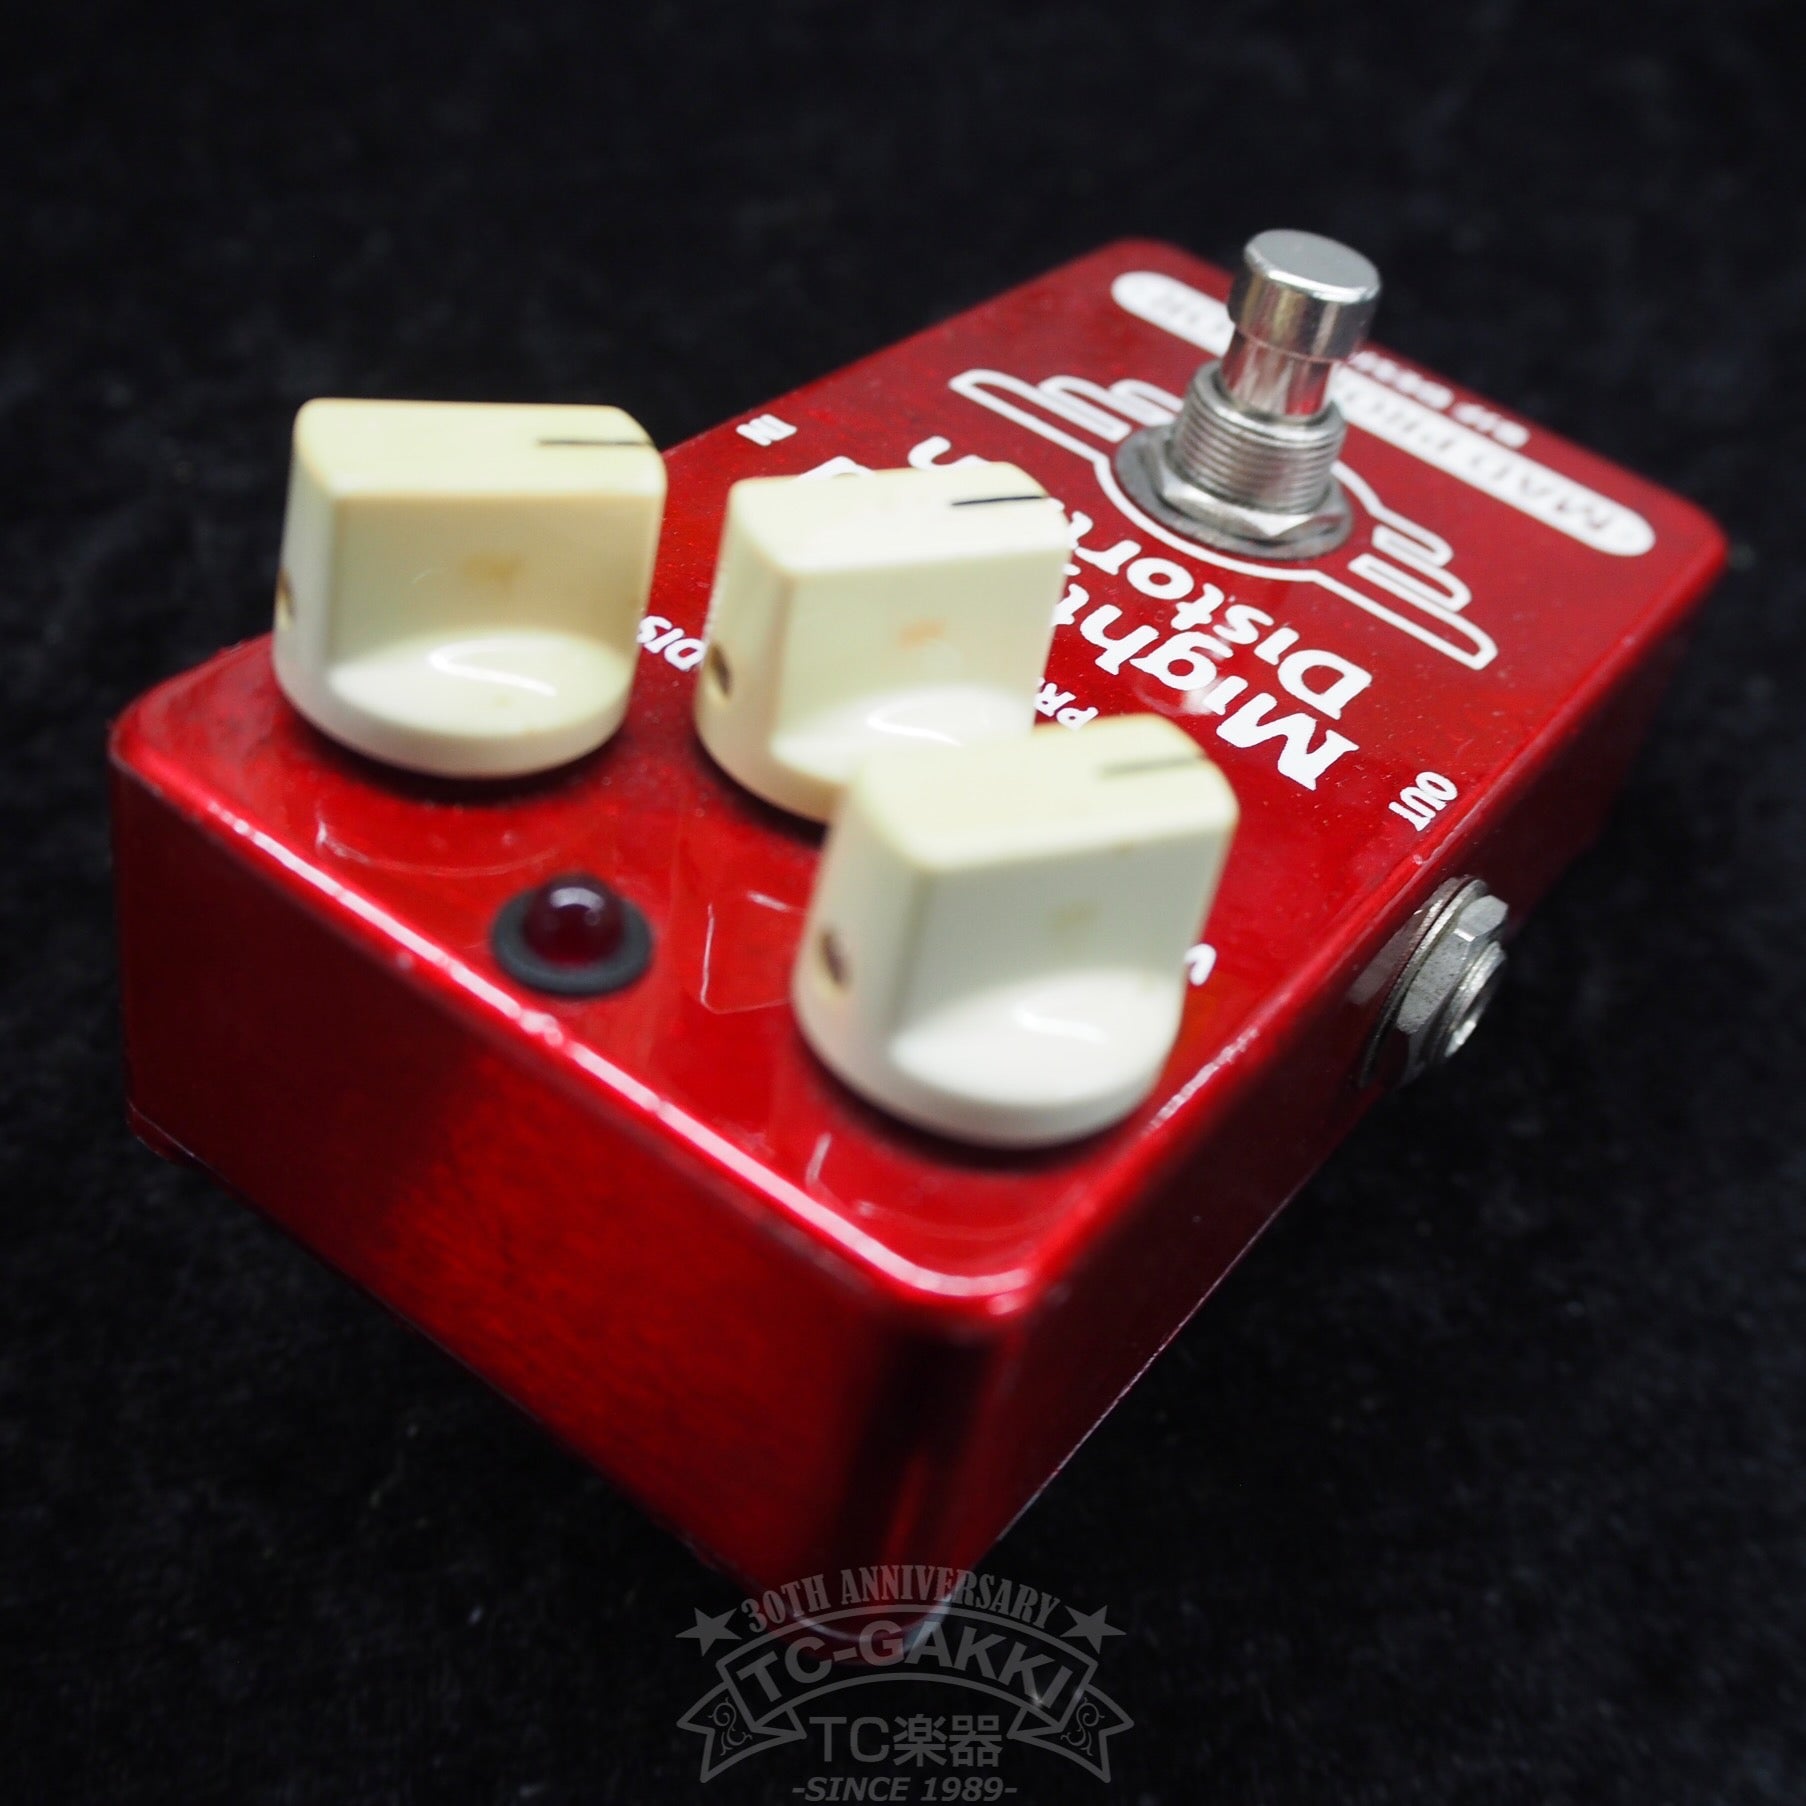 Mighty Red Distortion (Hand Wired Ver.) - TC楽器 - TCGAKKI